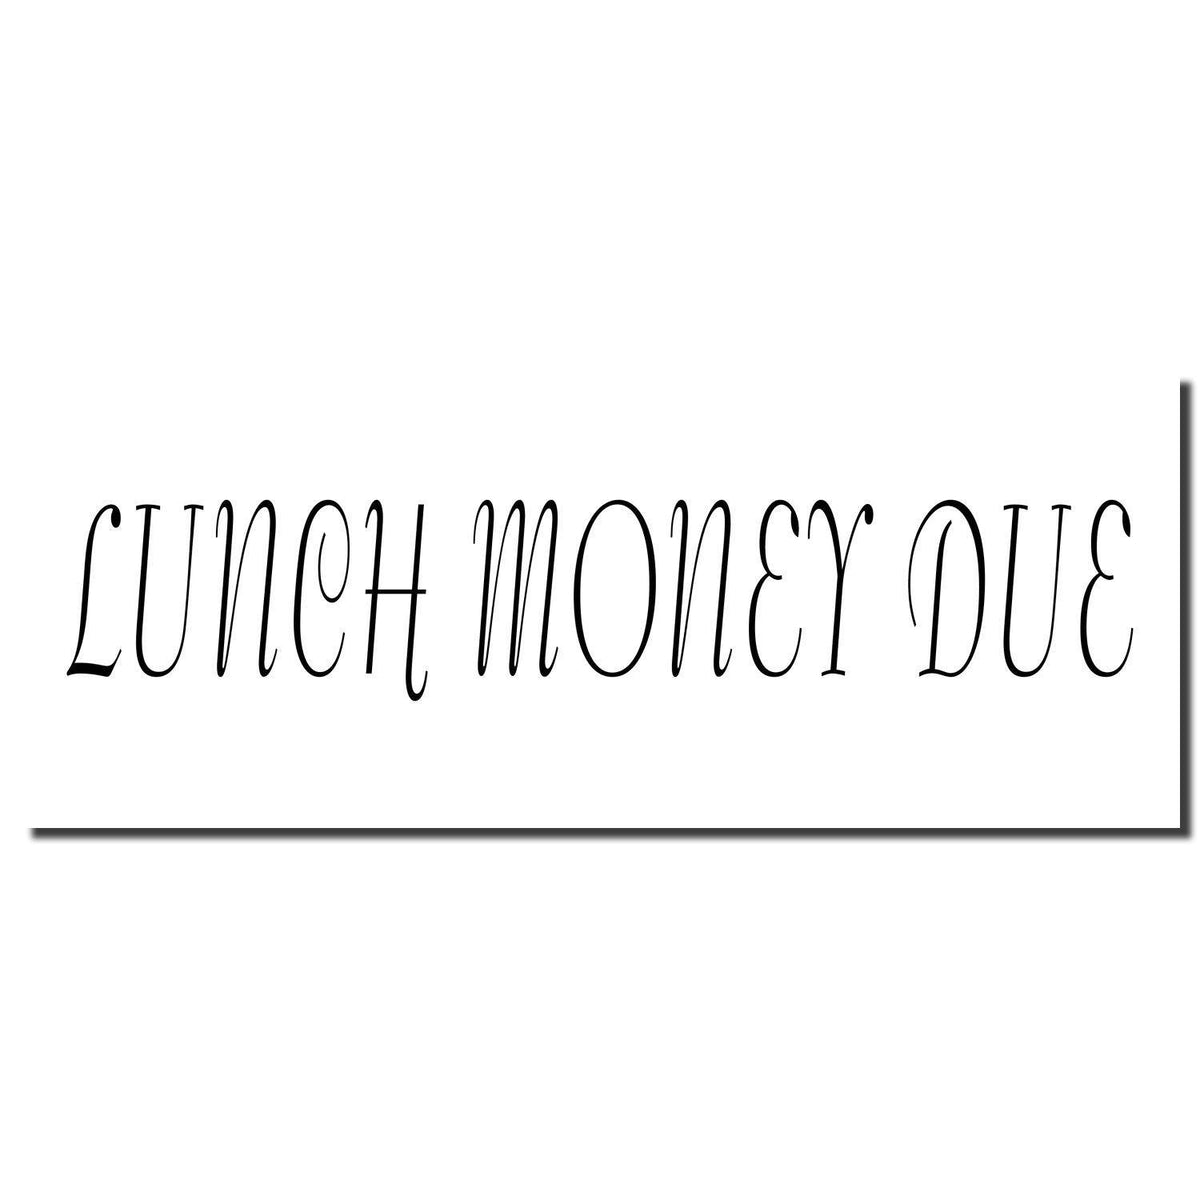 Lunch Money Due Rubber Stamp - Engineer Seal Stamps - Brand_Acorn, Impression Size_Small, Stamp Type_Regular Stamp, Type of Use_Business, Type of Use_Finance